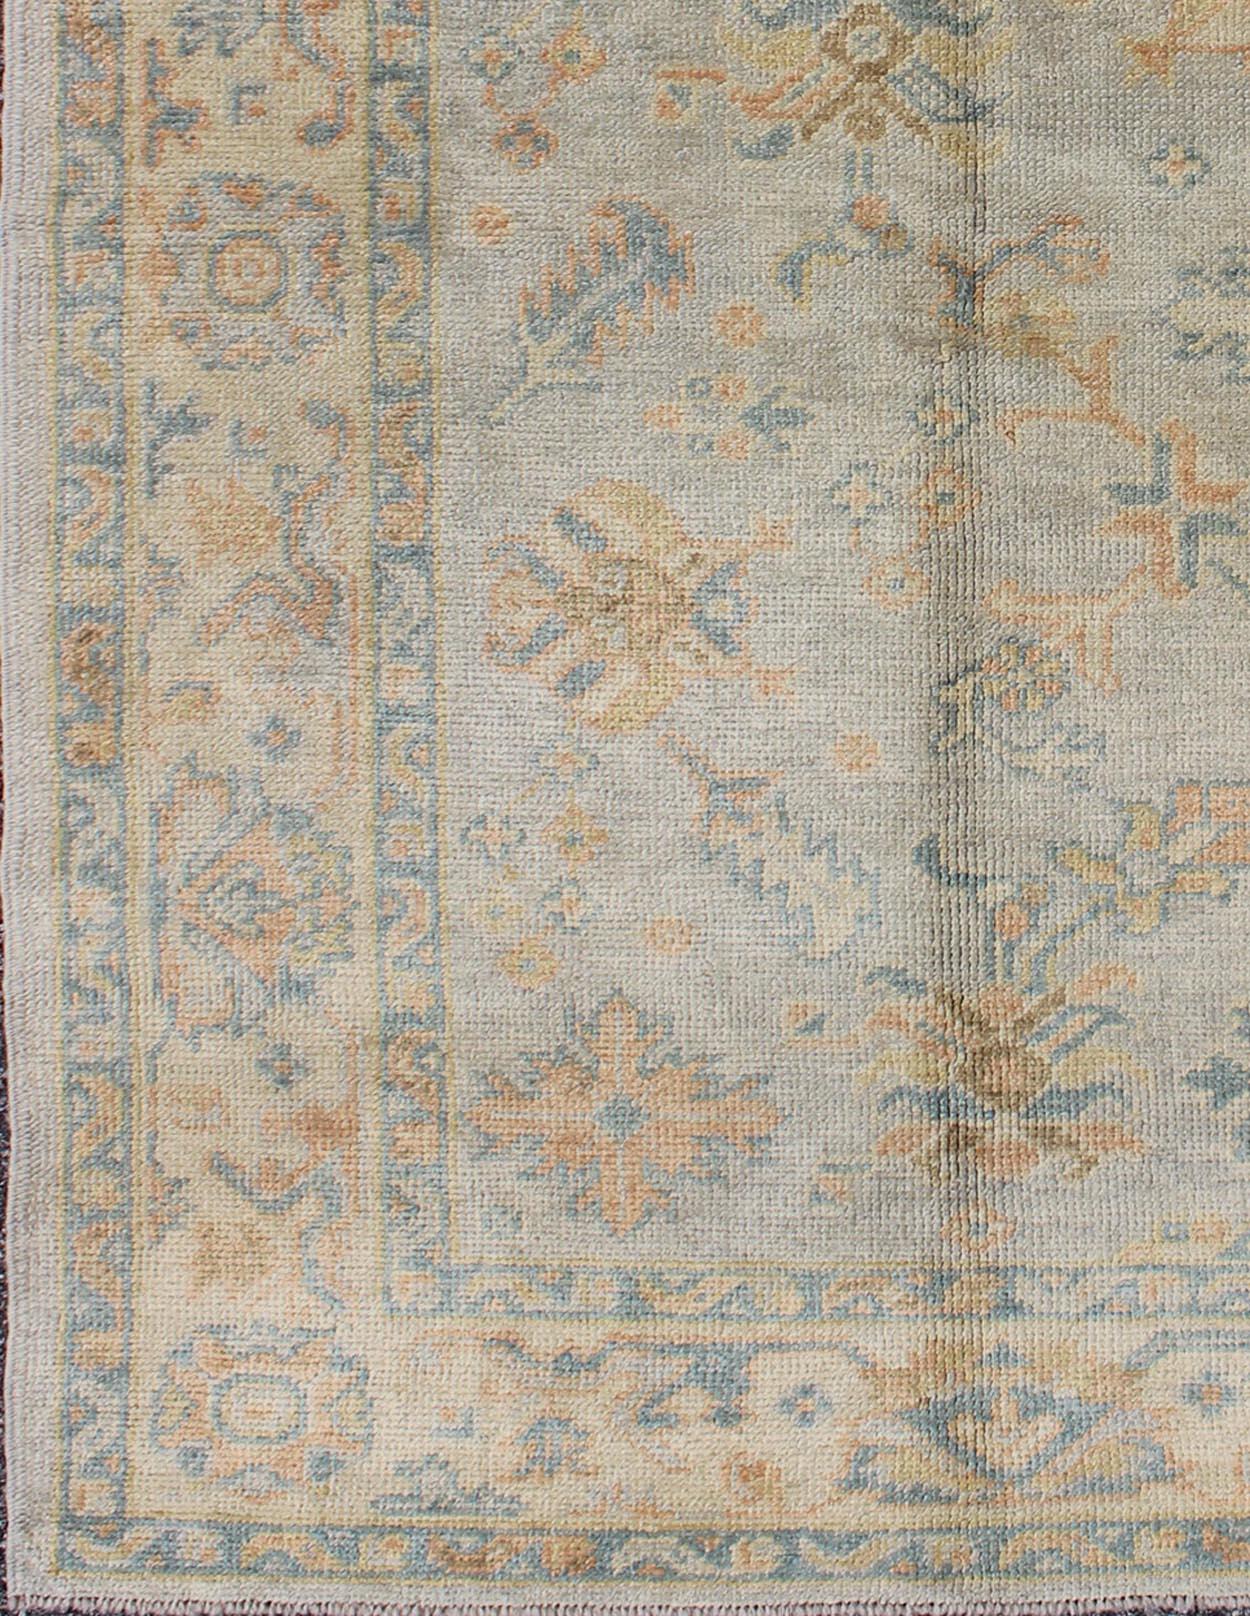 Turkish Oushak rug with neutral color palette and all-over flower design, rug en-842, country of origin / type: Turkey / Oushak

This traditional Oushak rug from Turkey features a subdued, neutral color palette and an all-over design of floral